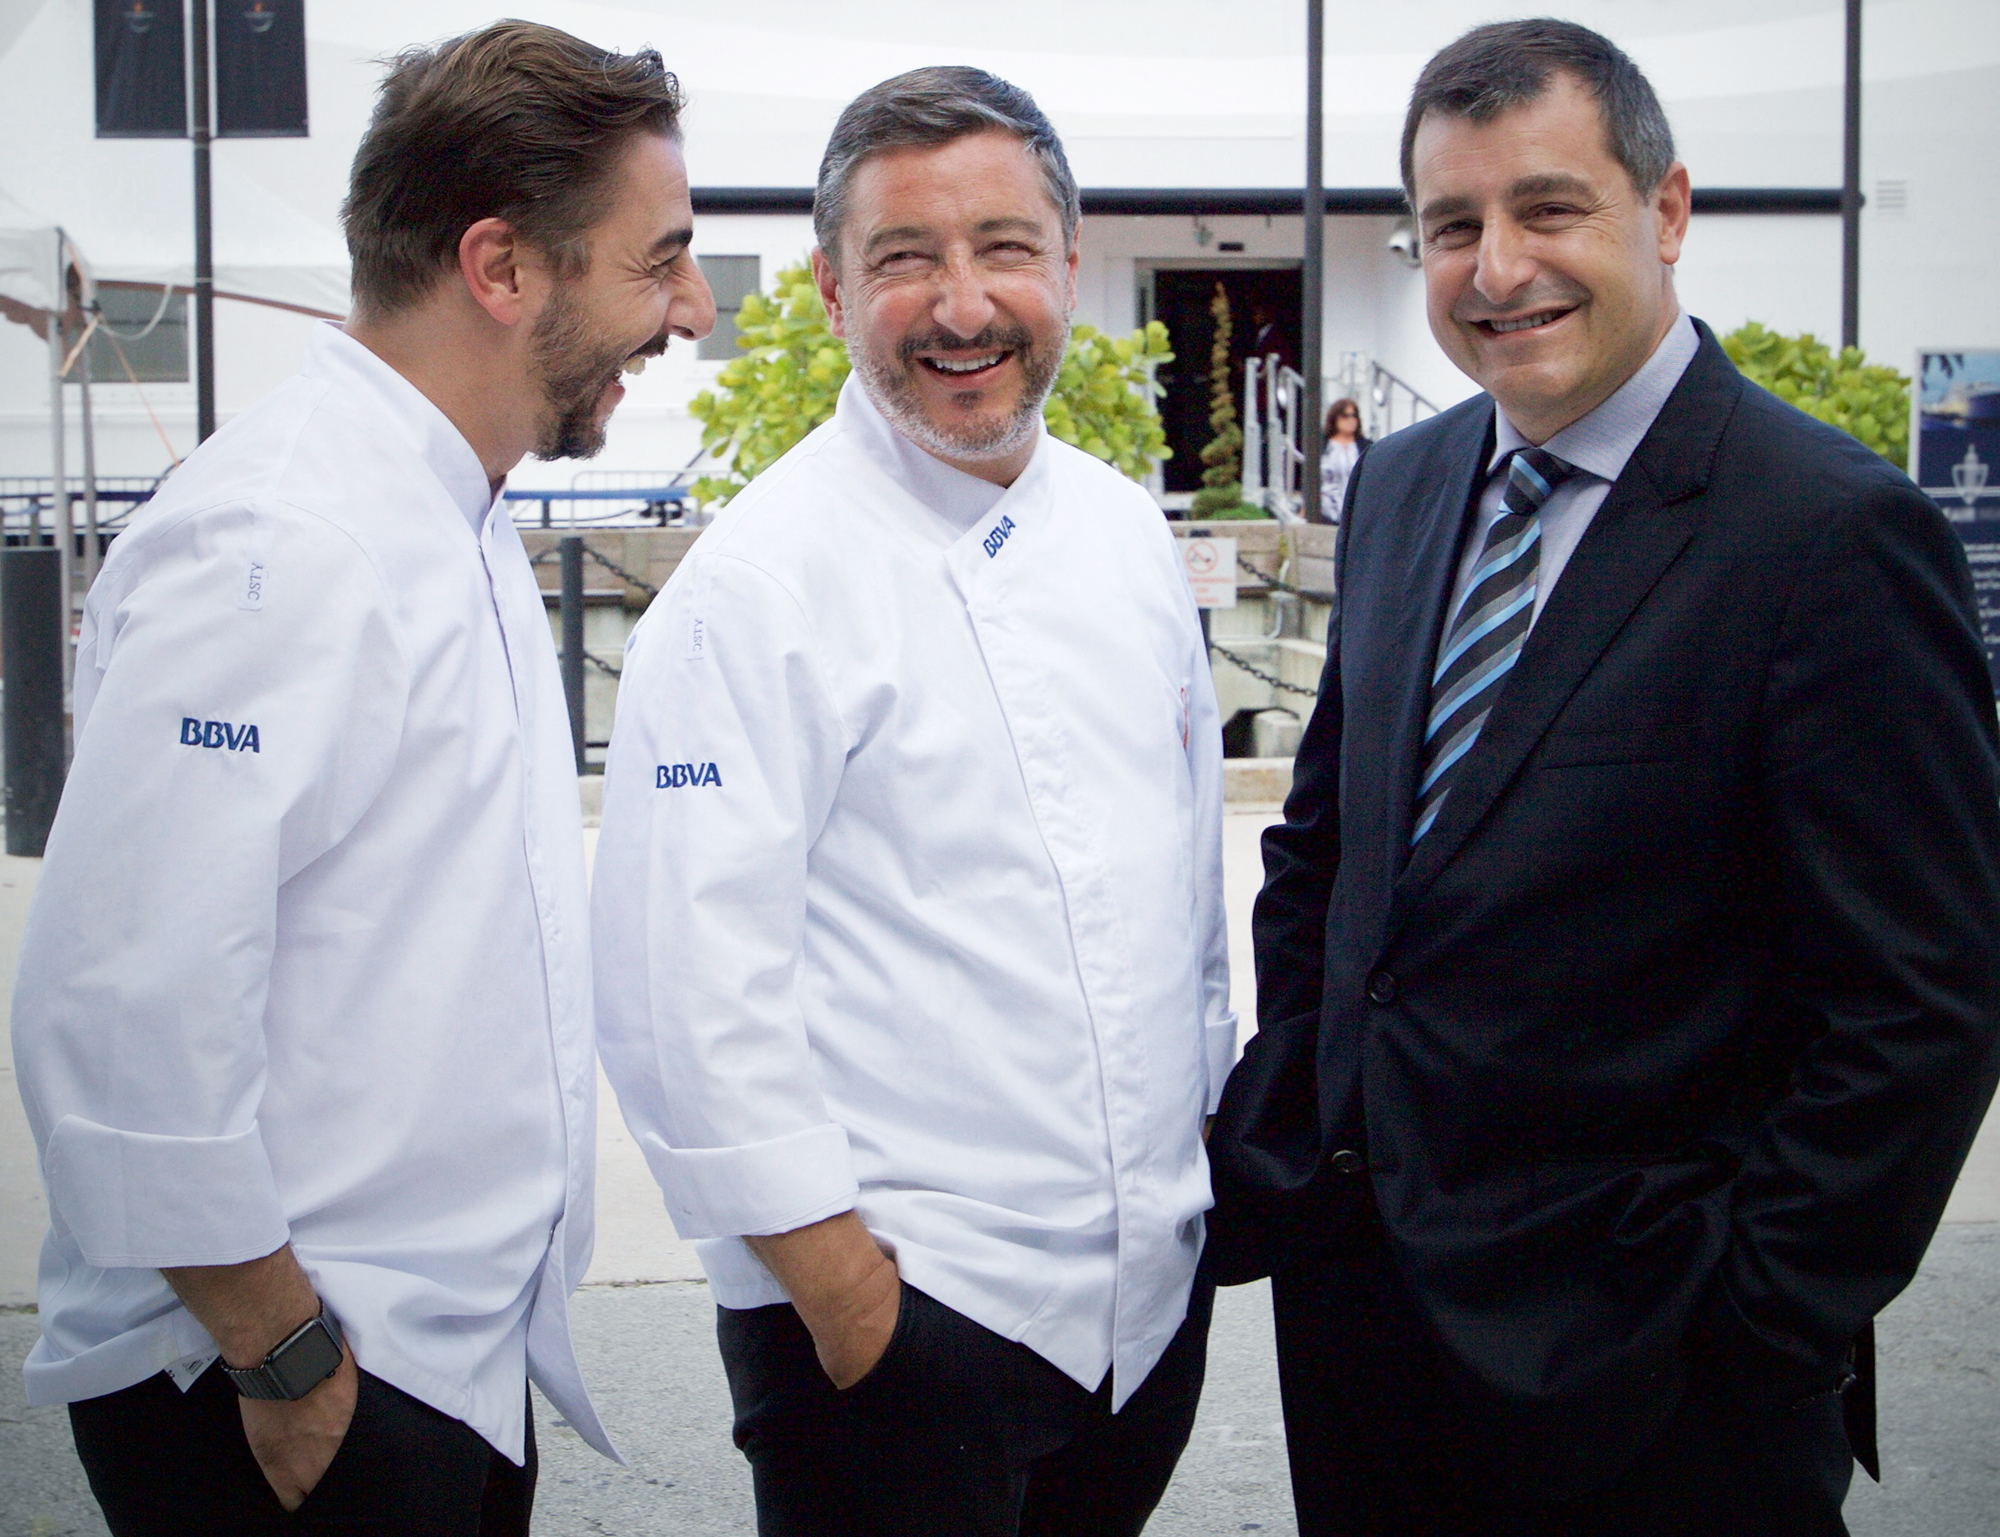 File photo of the Roca brothers, who run El Celler de Can Roca, a top-rated restaurant in northeast Spain. From left to right: Jordi, Joan and Josep Roca.